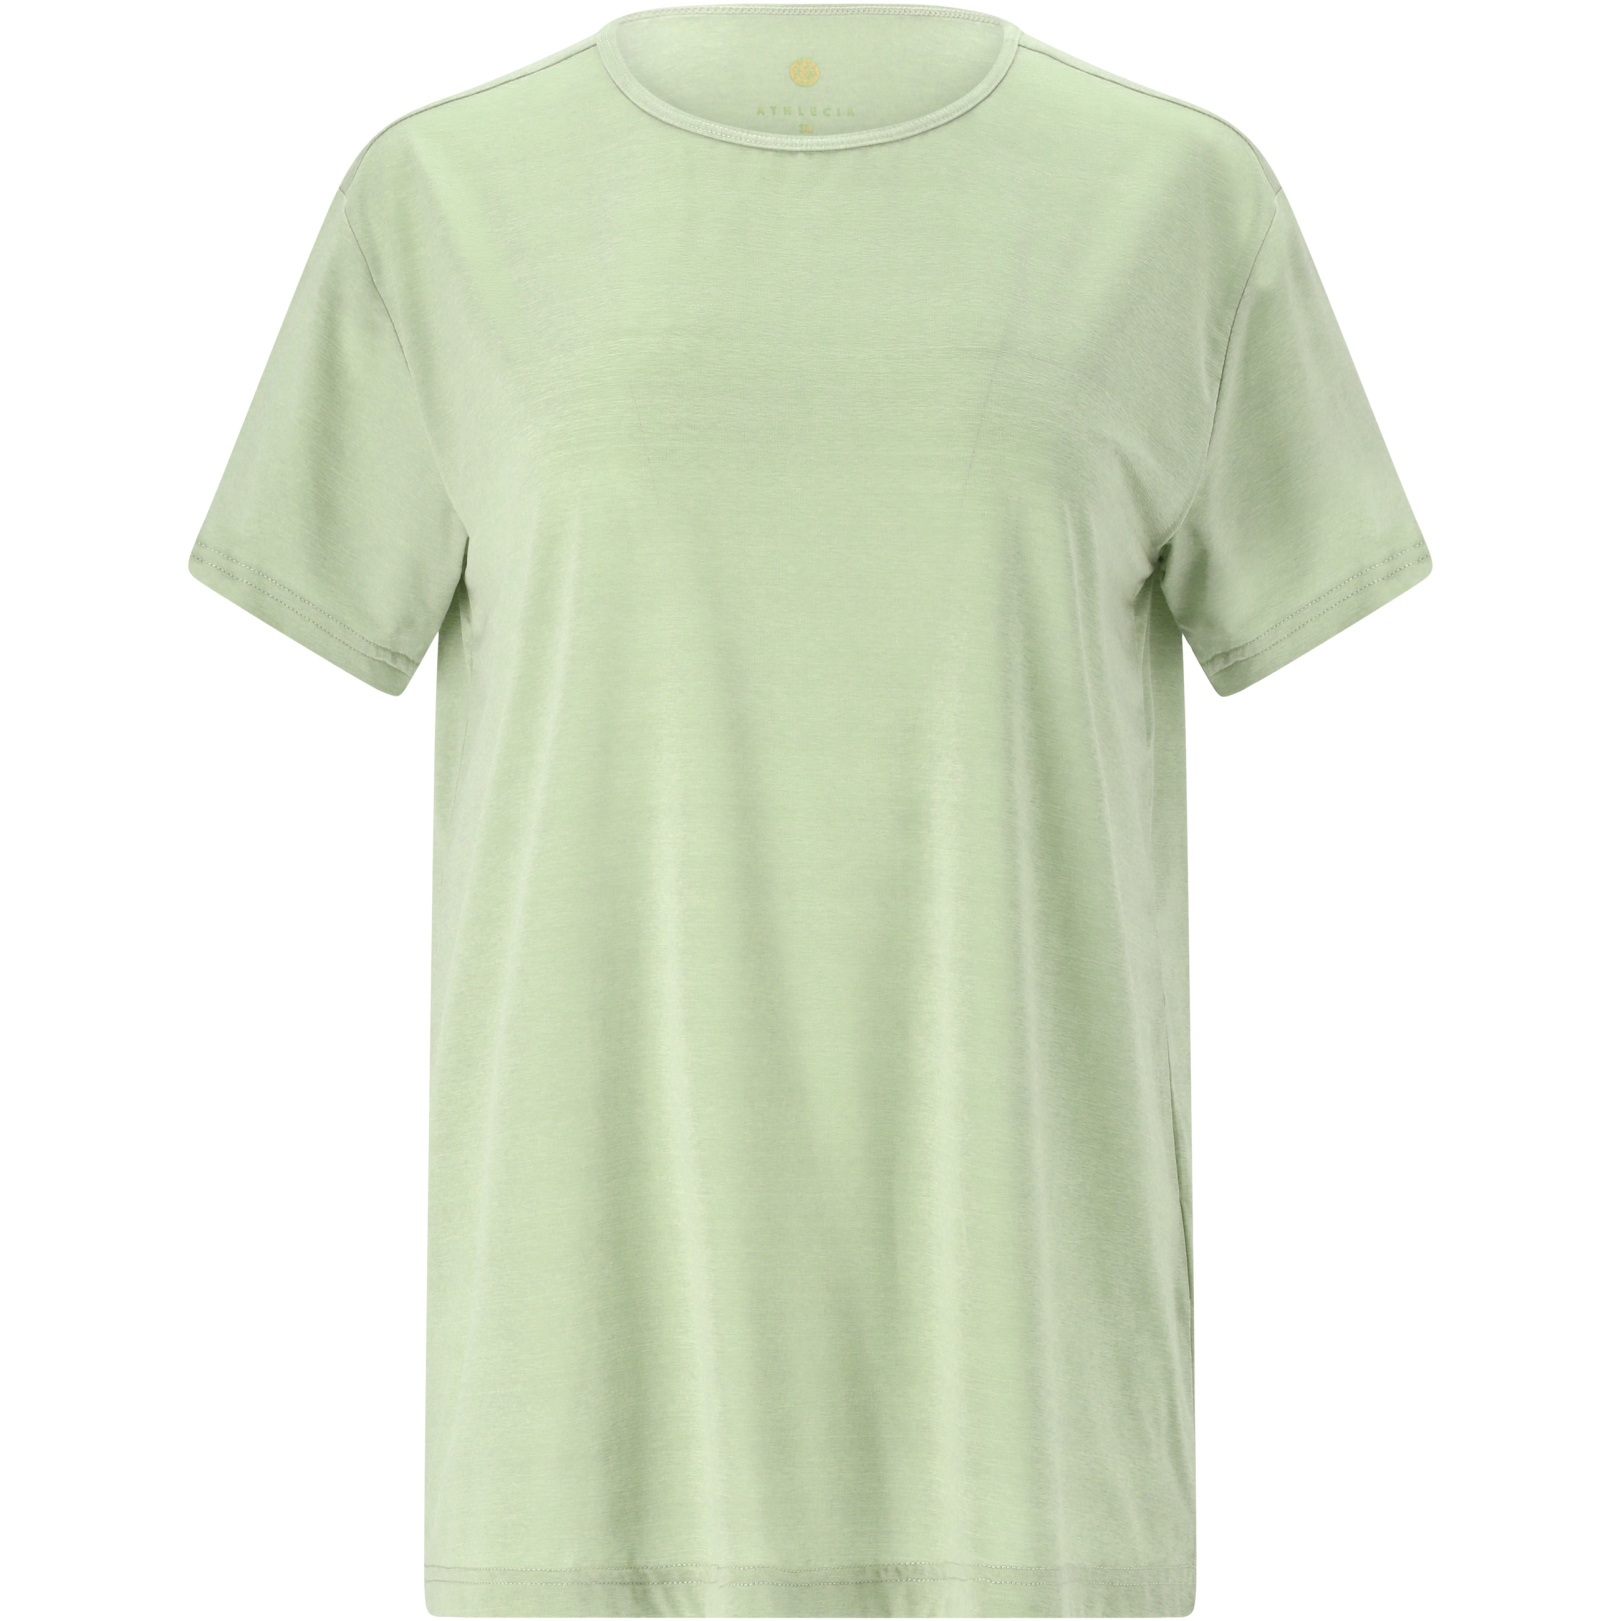 Picture of Athlecia Lizzy Slub T-Shirt Women - Green Lily